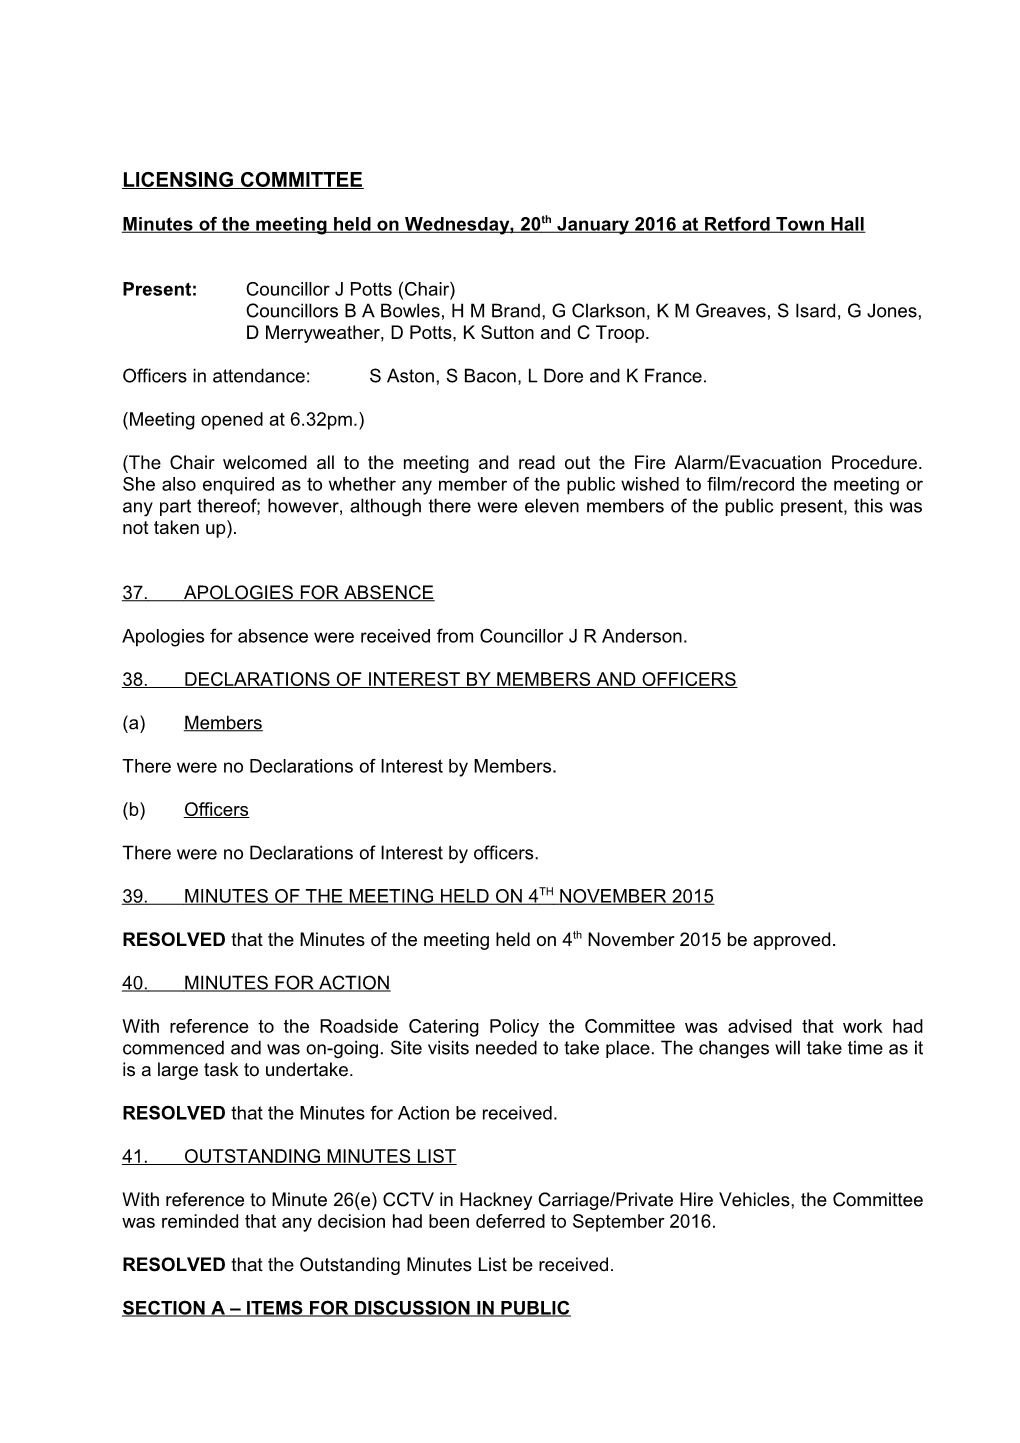 Minutes of the Meeting Held on Wednesday, 20Th January 2016 at Retford Town Hall